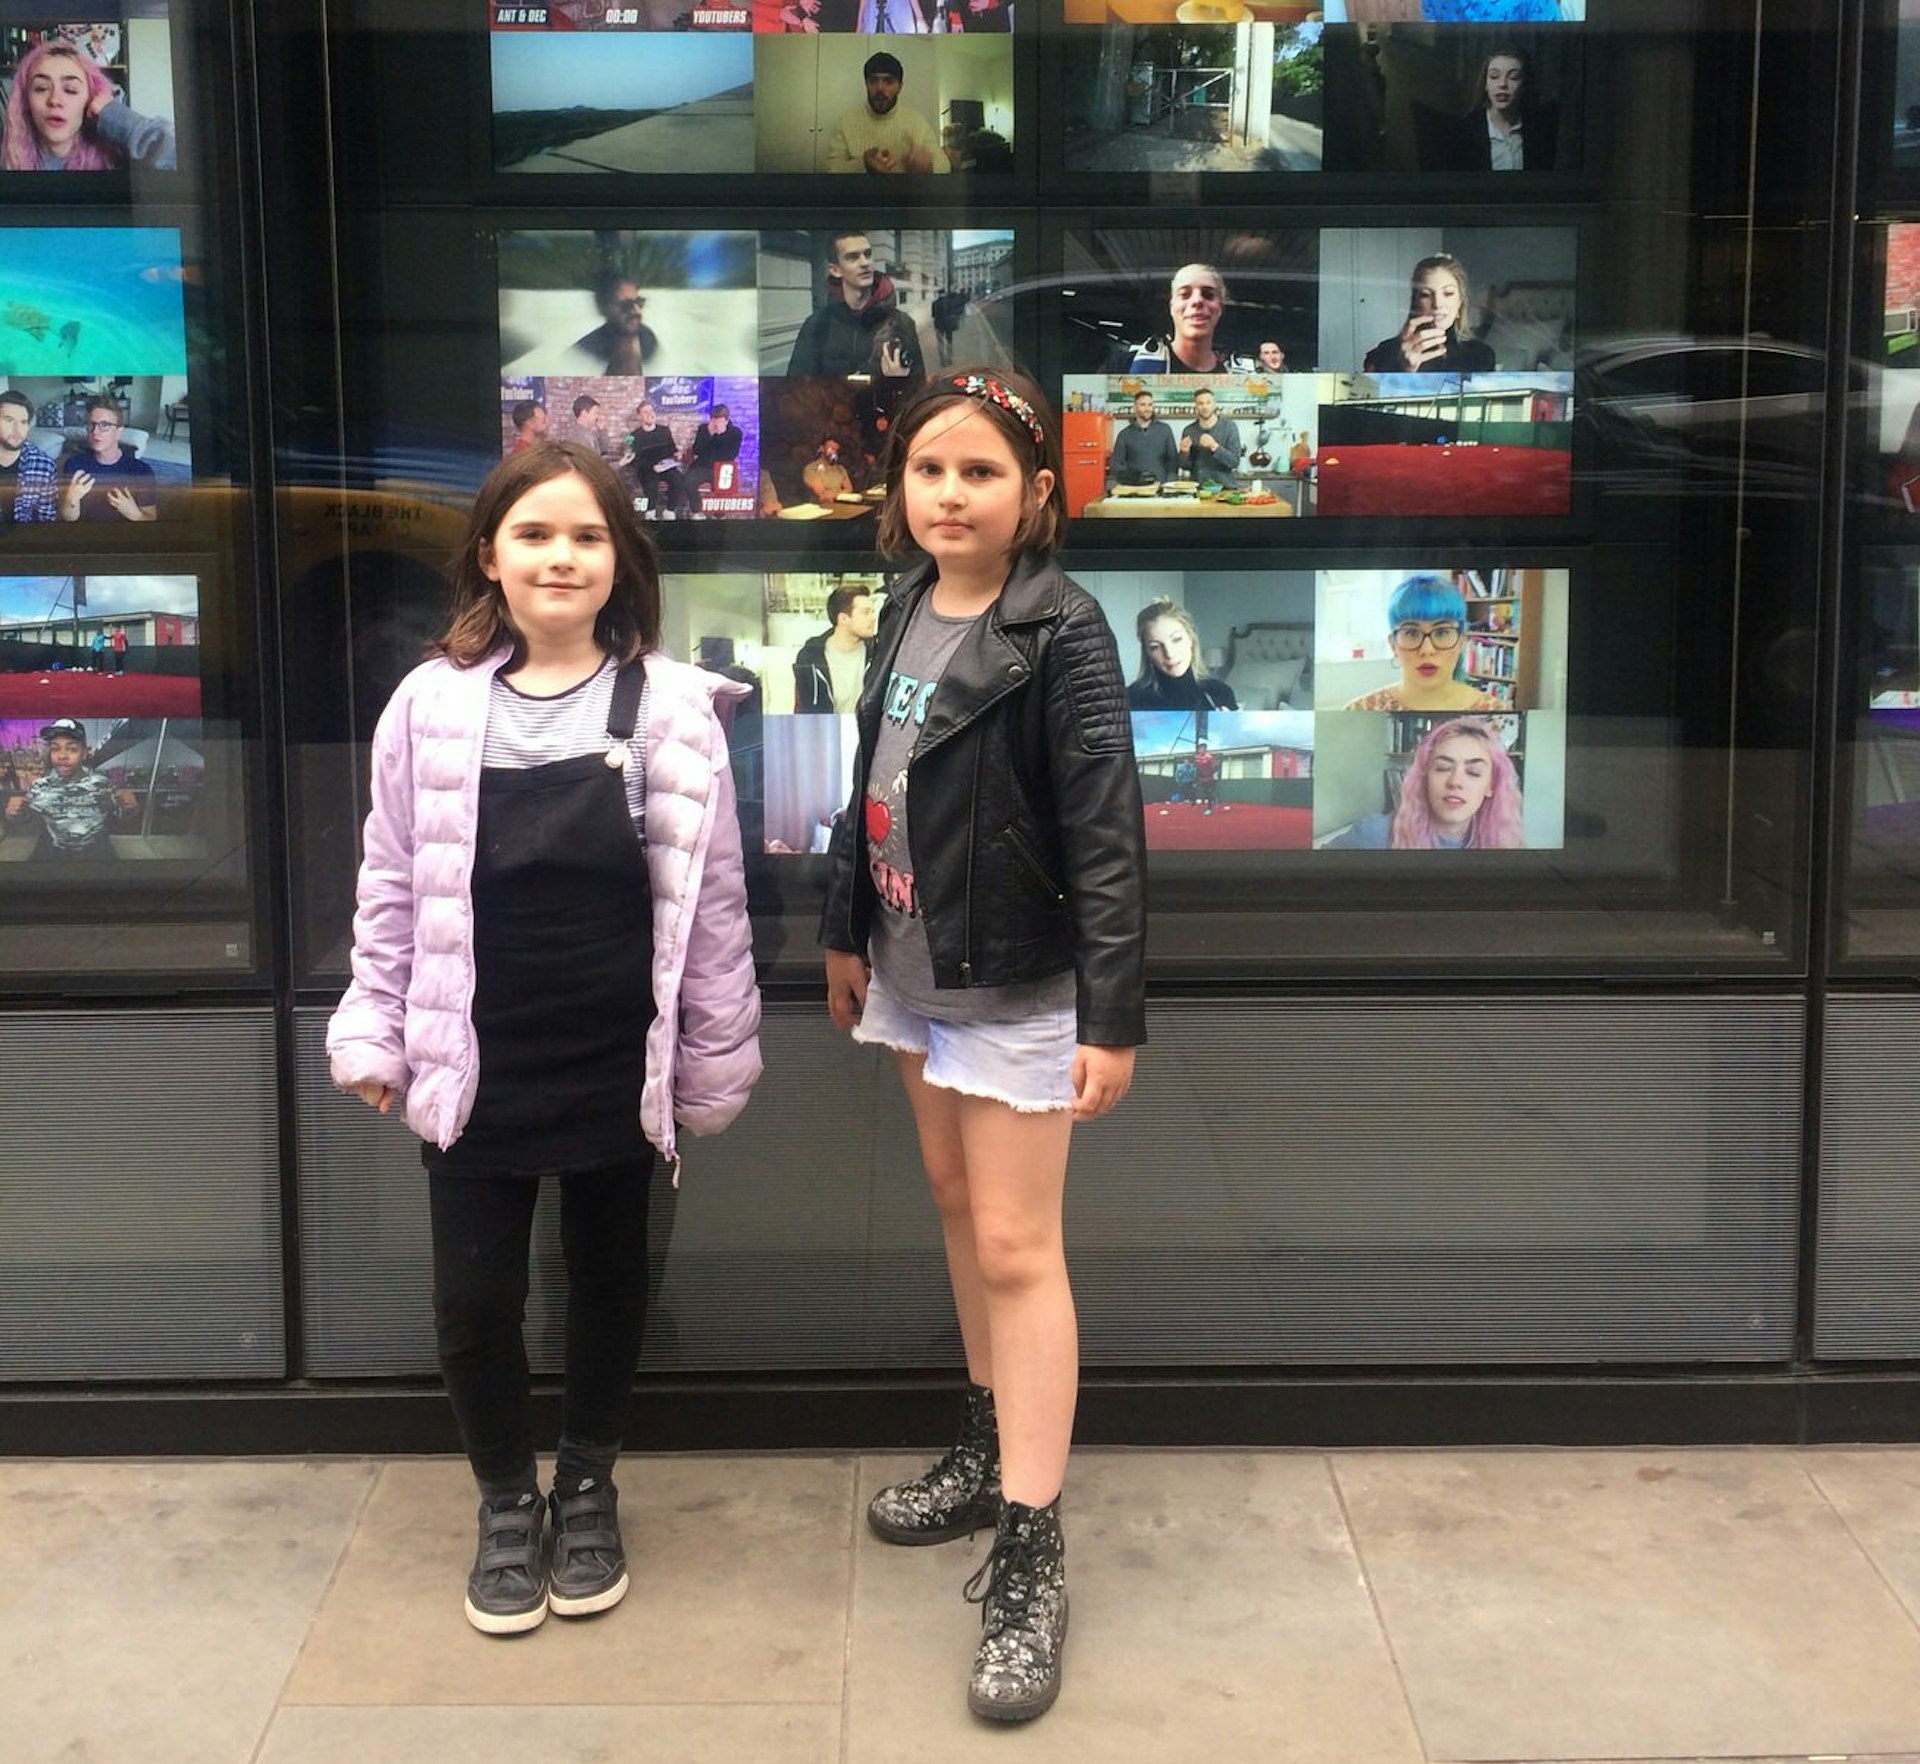 Tasmin's guides pose in front of the YouTube Creator Space in central London © Tasmin Waby / Lonely Planet